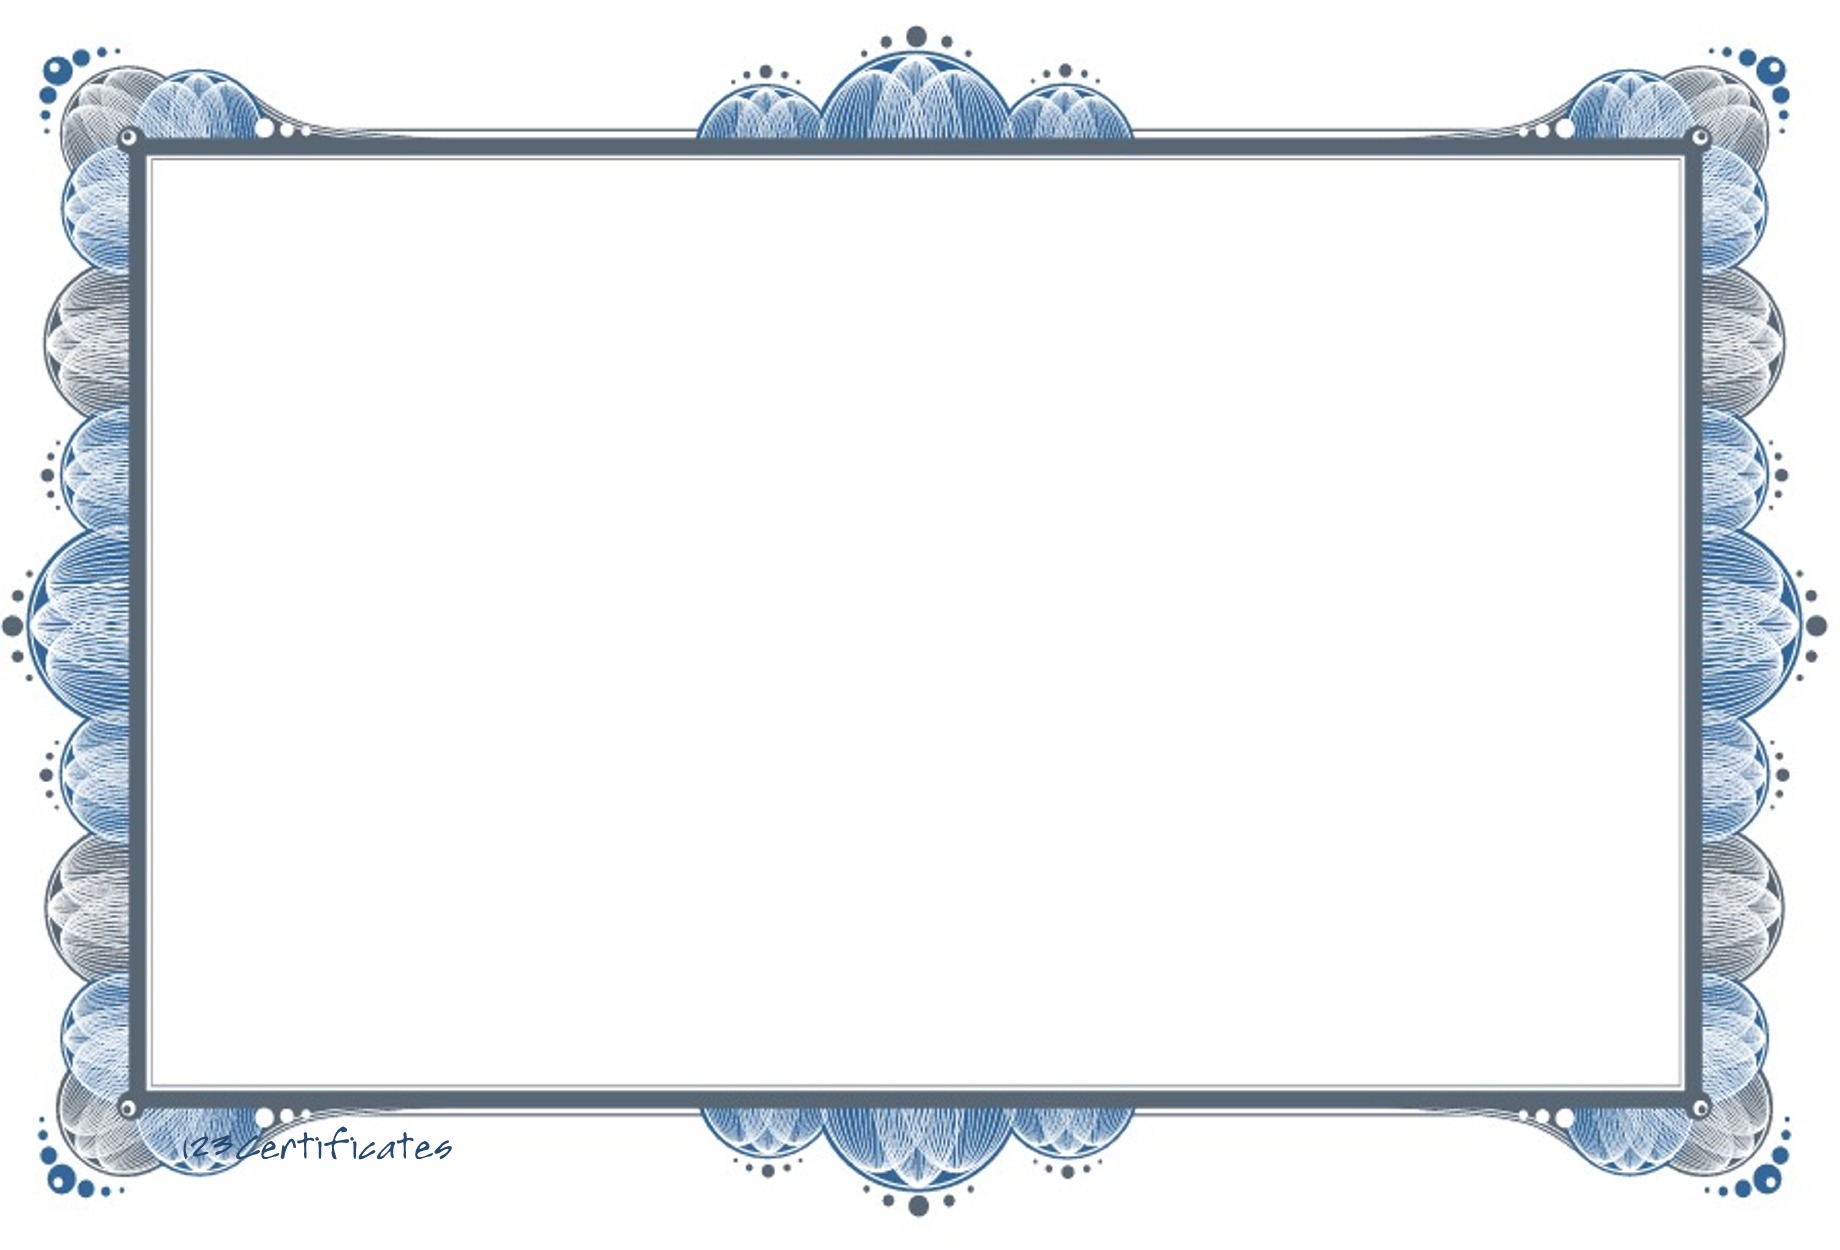 Free certificate borders to download, certificate templates for 